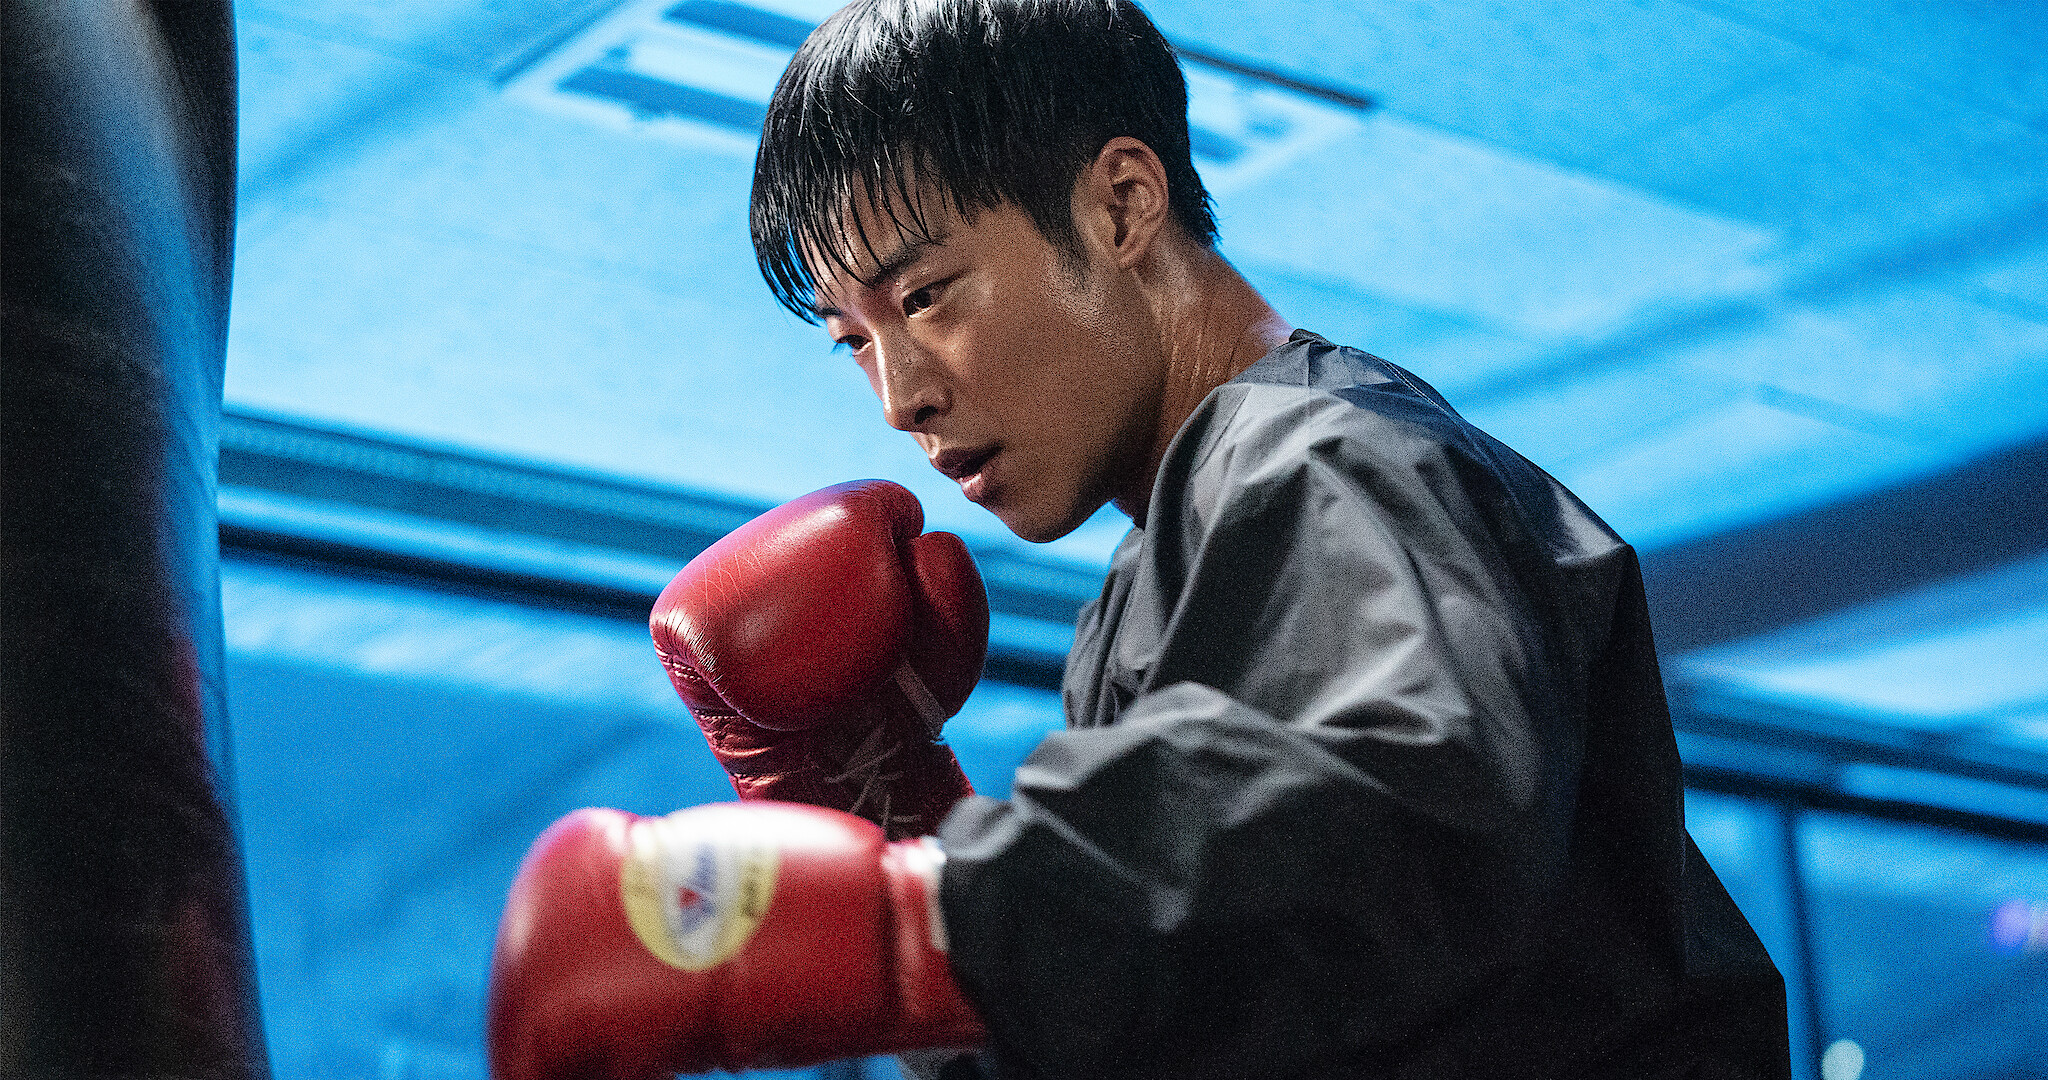 Bloodhounds, What You Need to Know About the Korean Action Thriller K-Drama Series